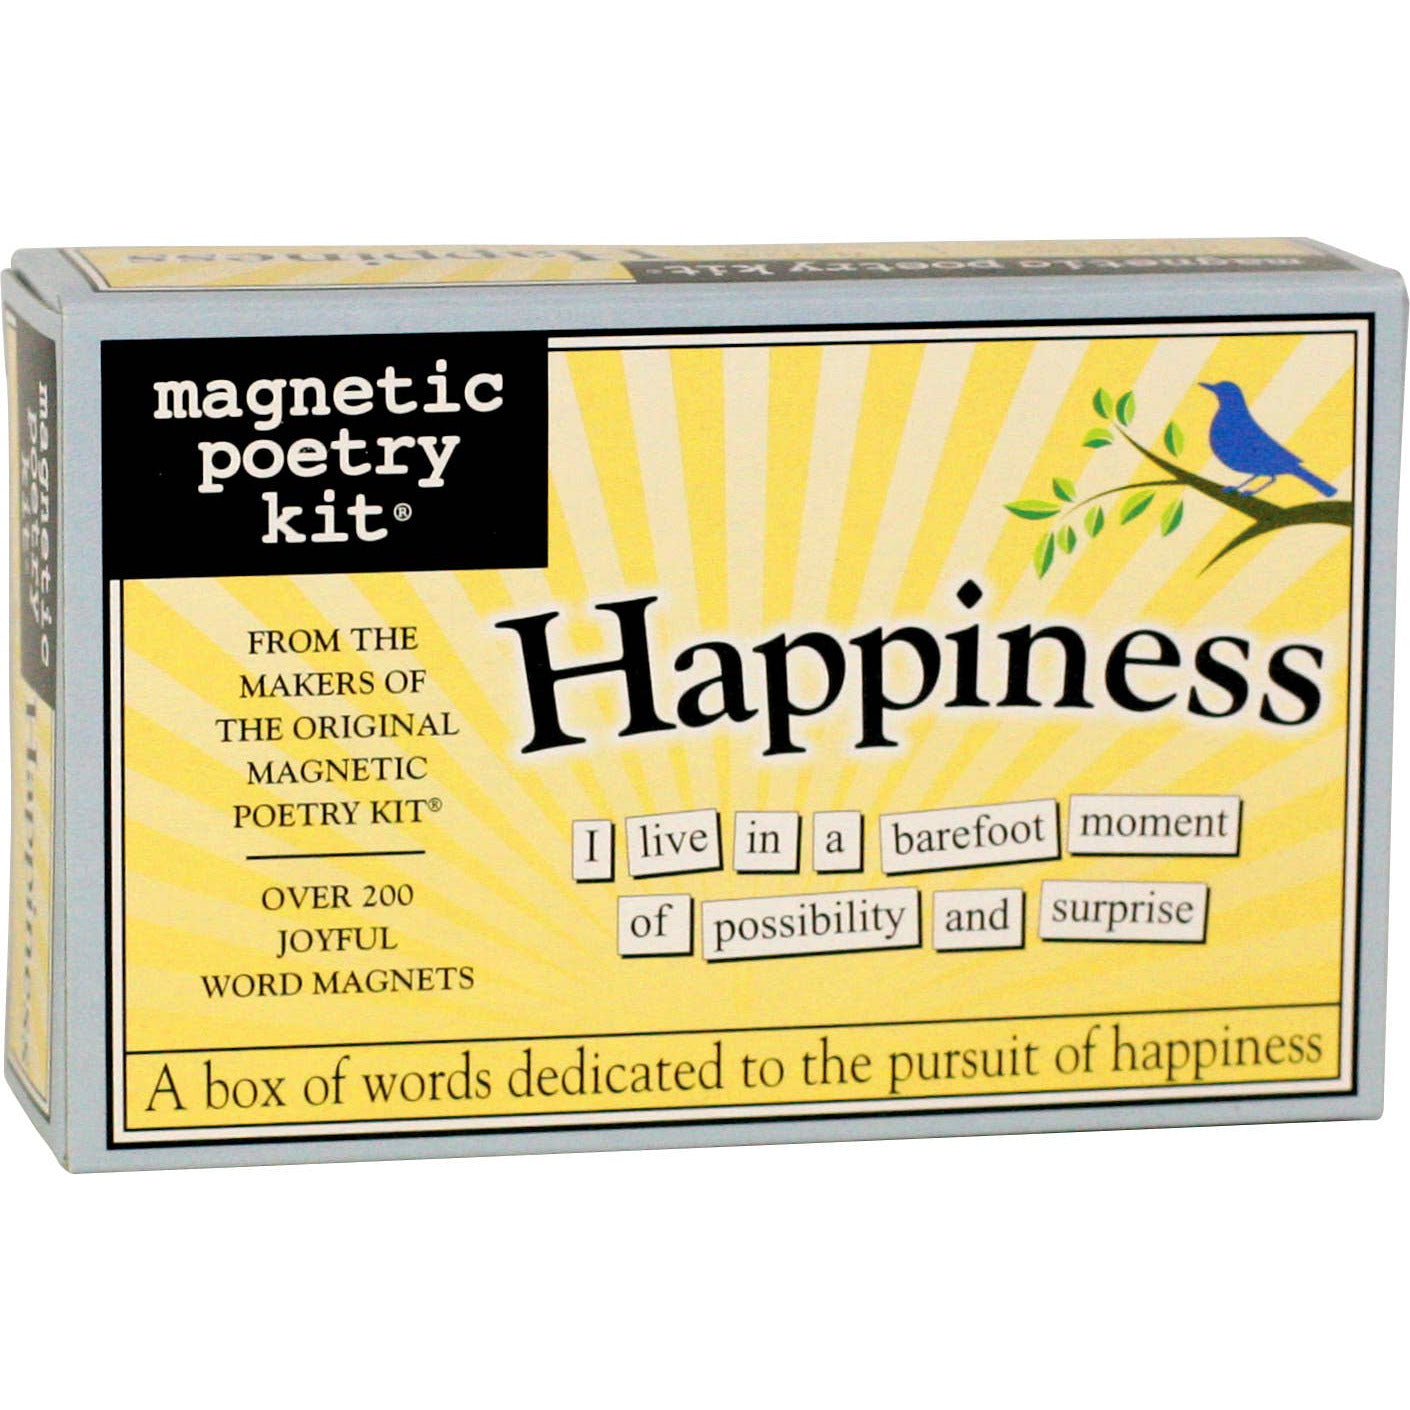 Magnetic Poetry Word Magnets Pack - Happiness